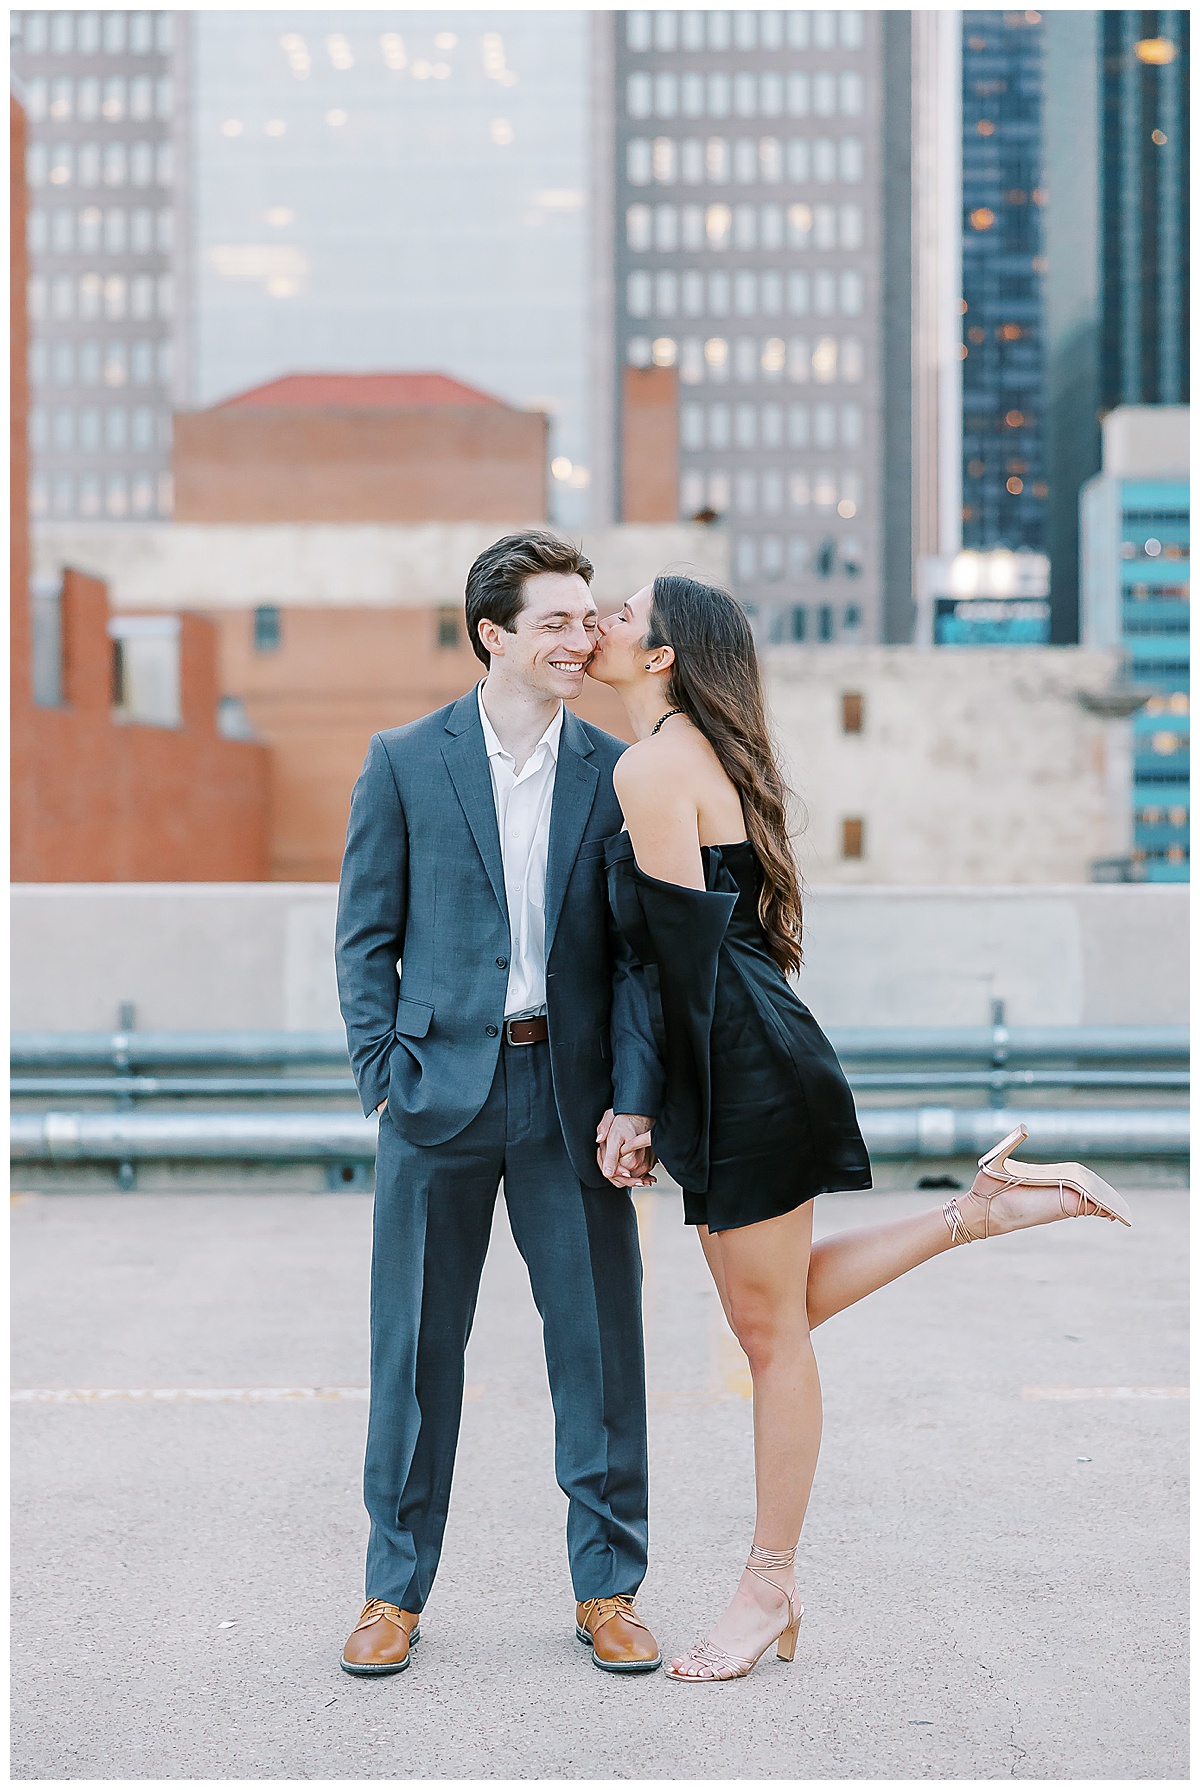 Abbie and Brandon's Dallas engagement session.